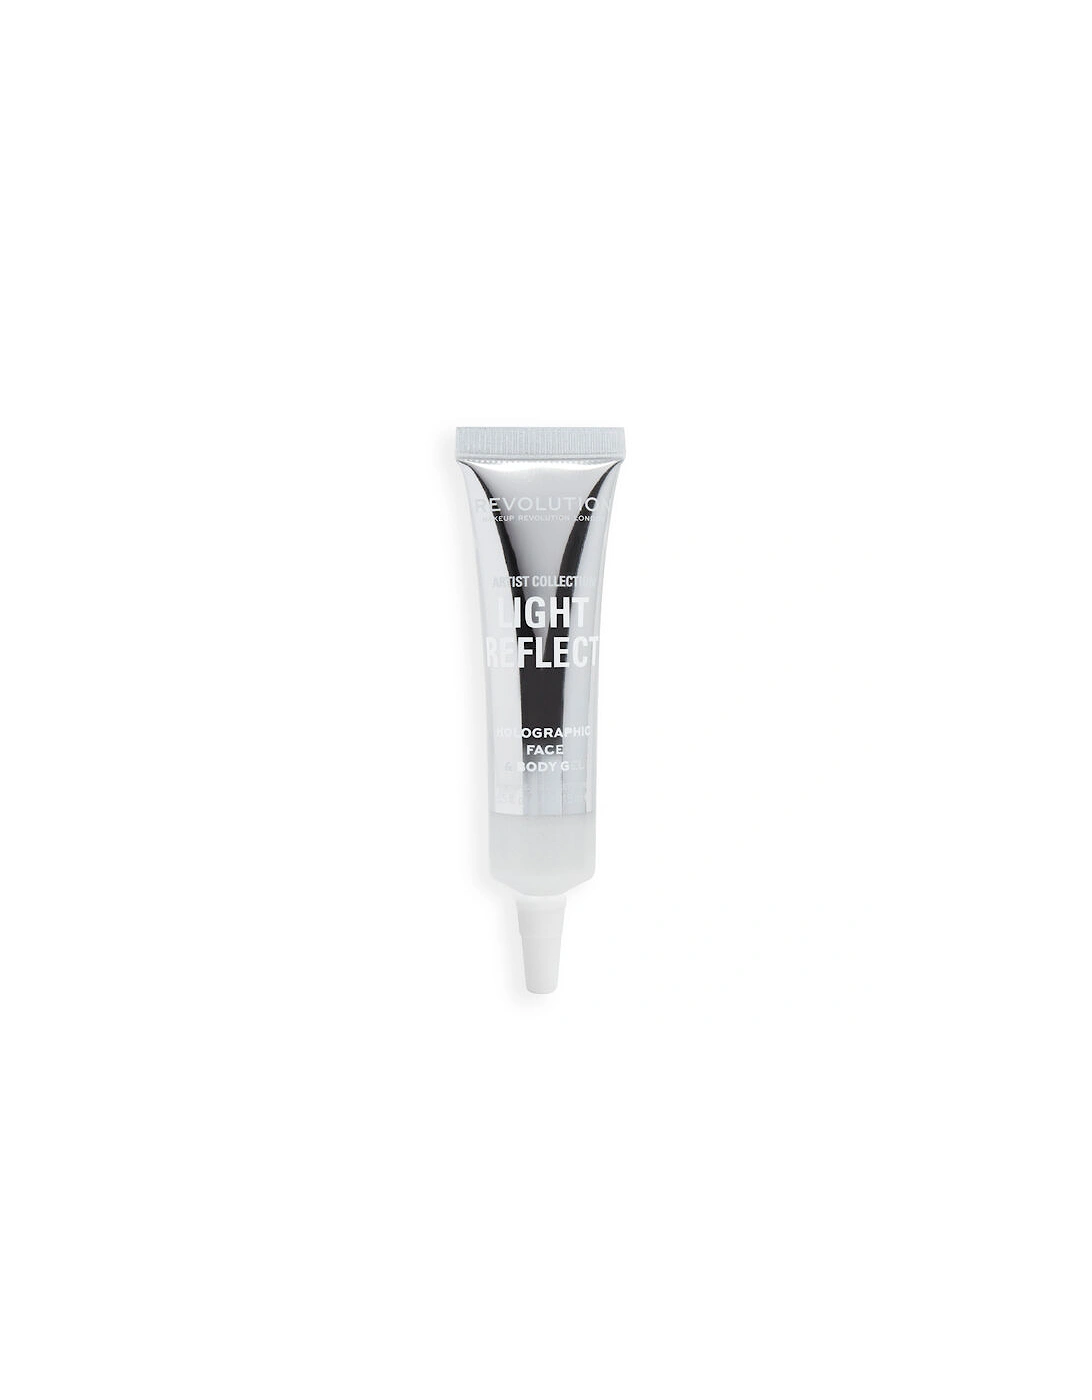 Makeup Artist Collection Reflective Face & Body Gel, 2 of 1